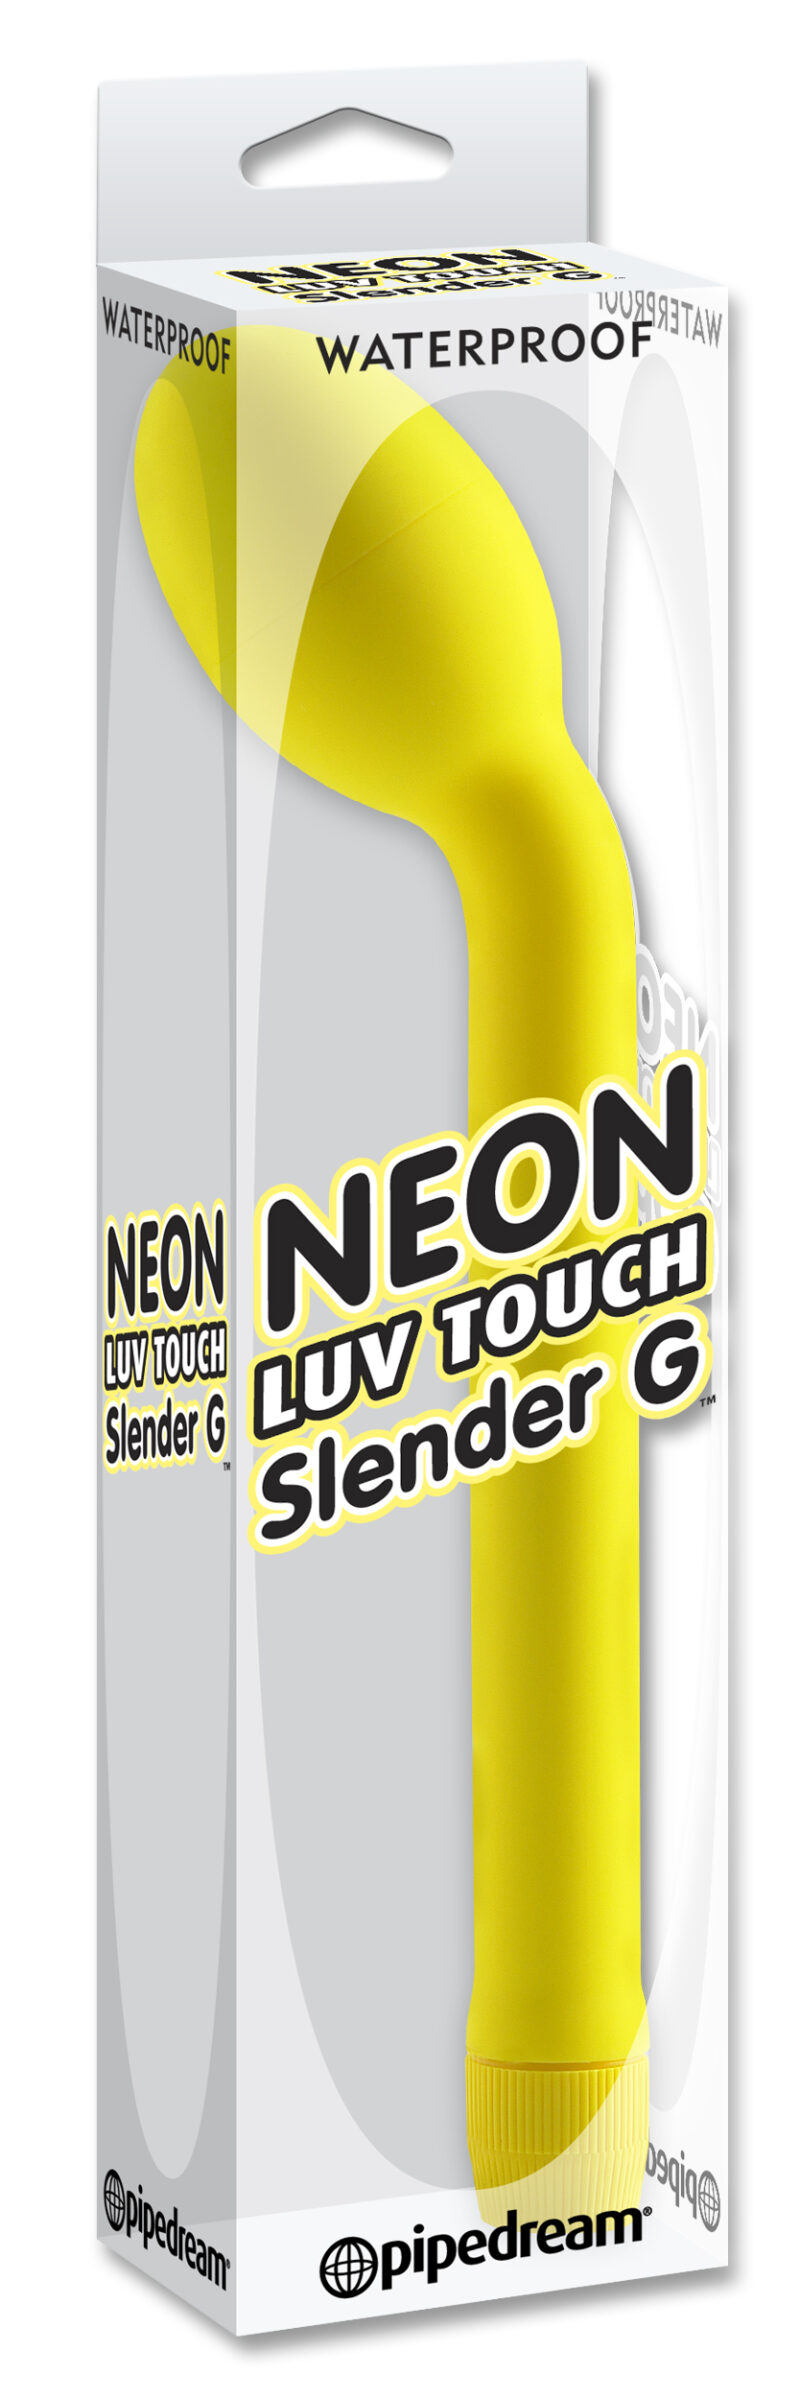 Pipedream Neon Luv Touch Slender G Vibrator Yellow